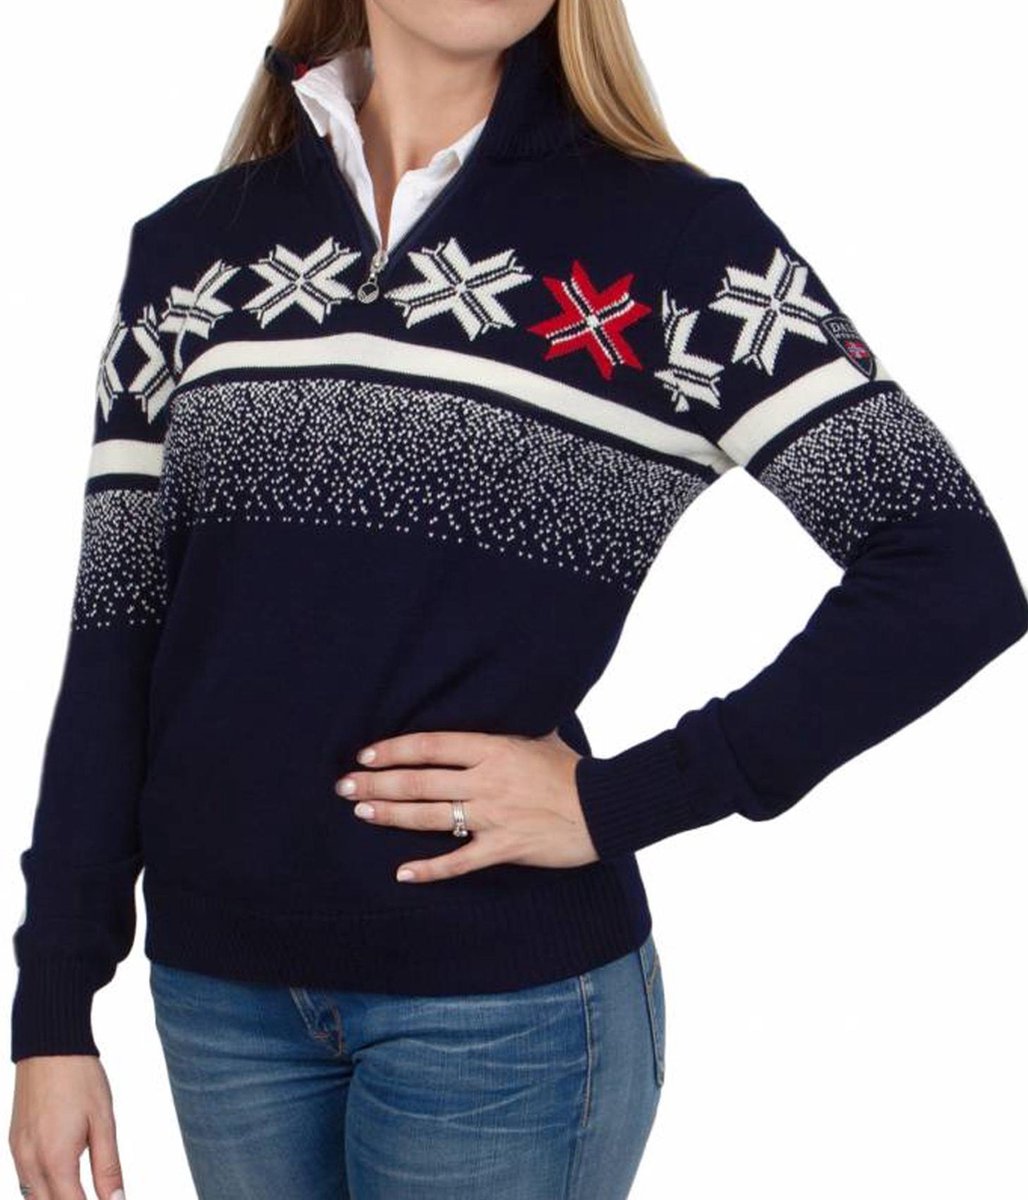 Dale of Norway ® "Olympic Passion" Dames Pullover, Donkerblauw | bol.com